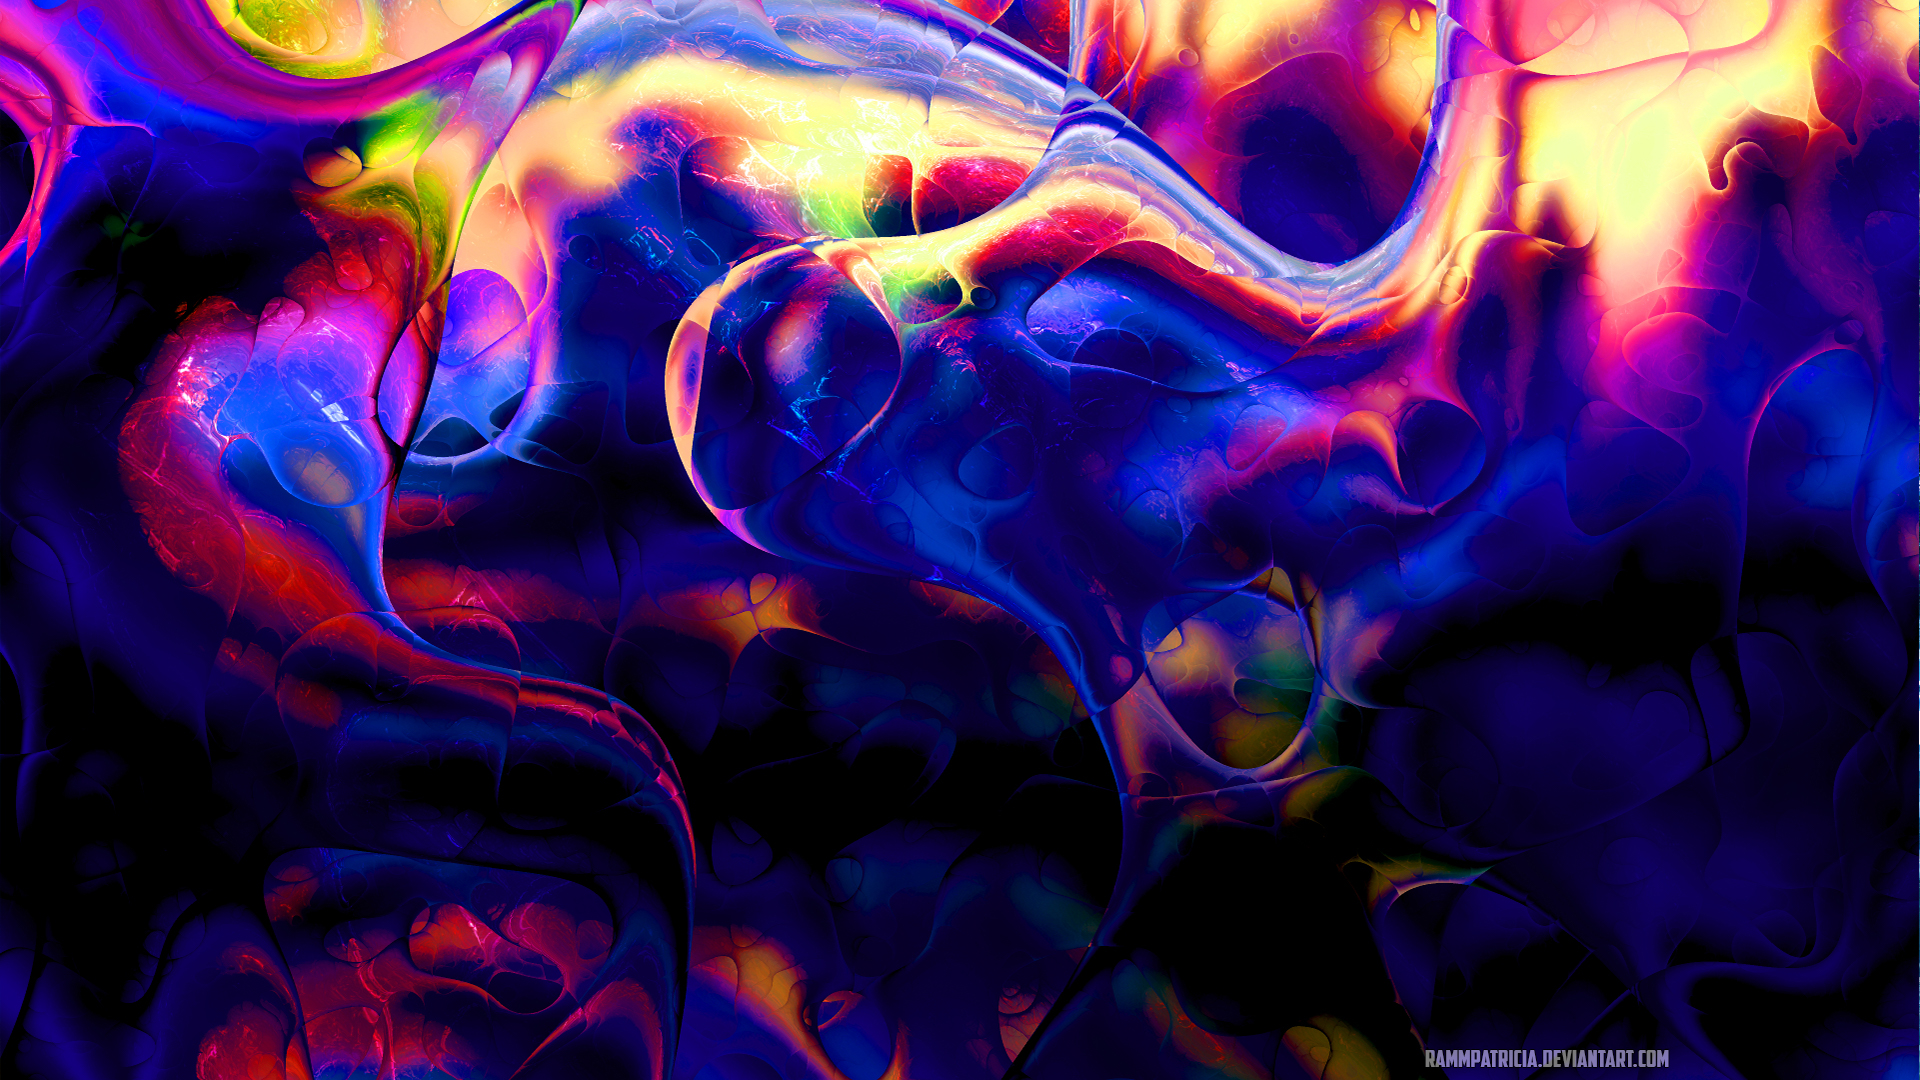 General 1920x1080 abstract colorful digital art RammPatricia